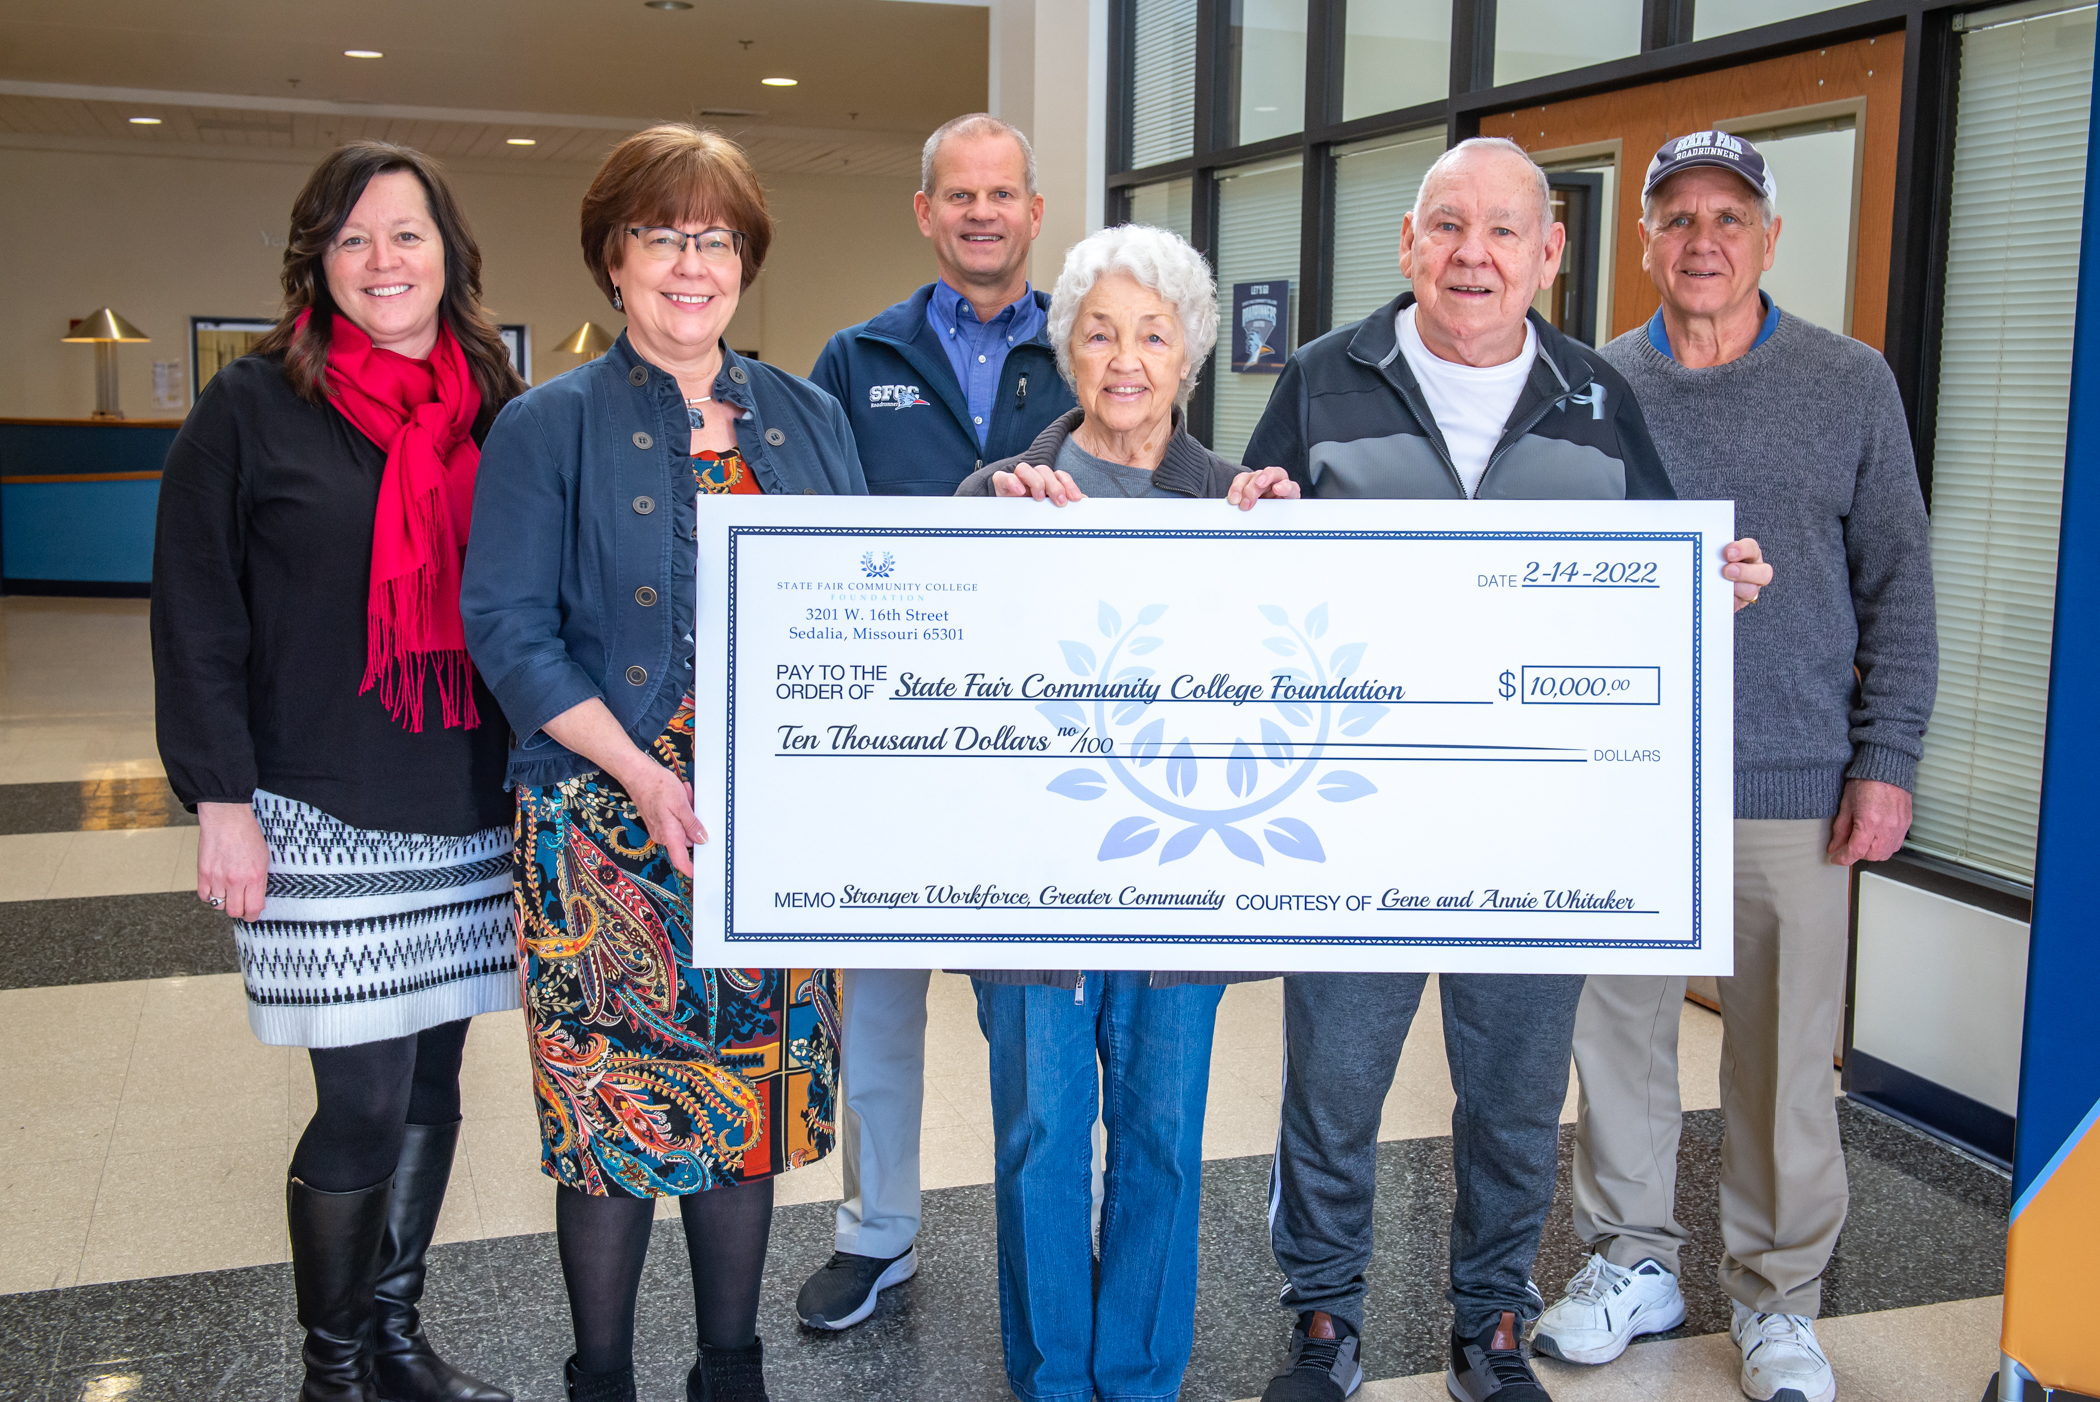 Read more about Gene and Annie Whitaker donate $10,000 to SFCC’s capital campaign